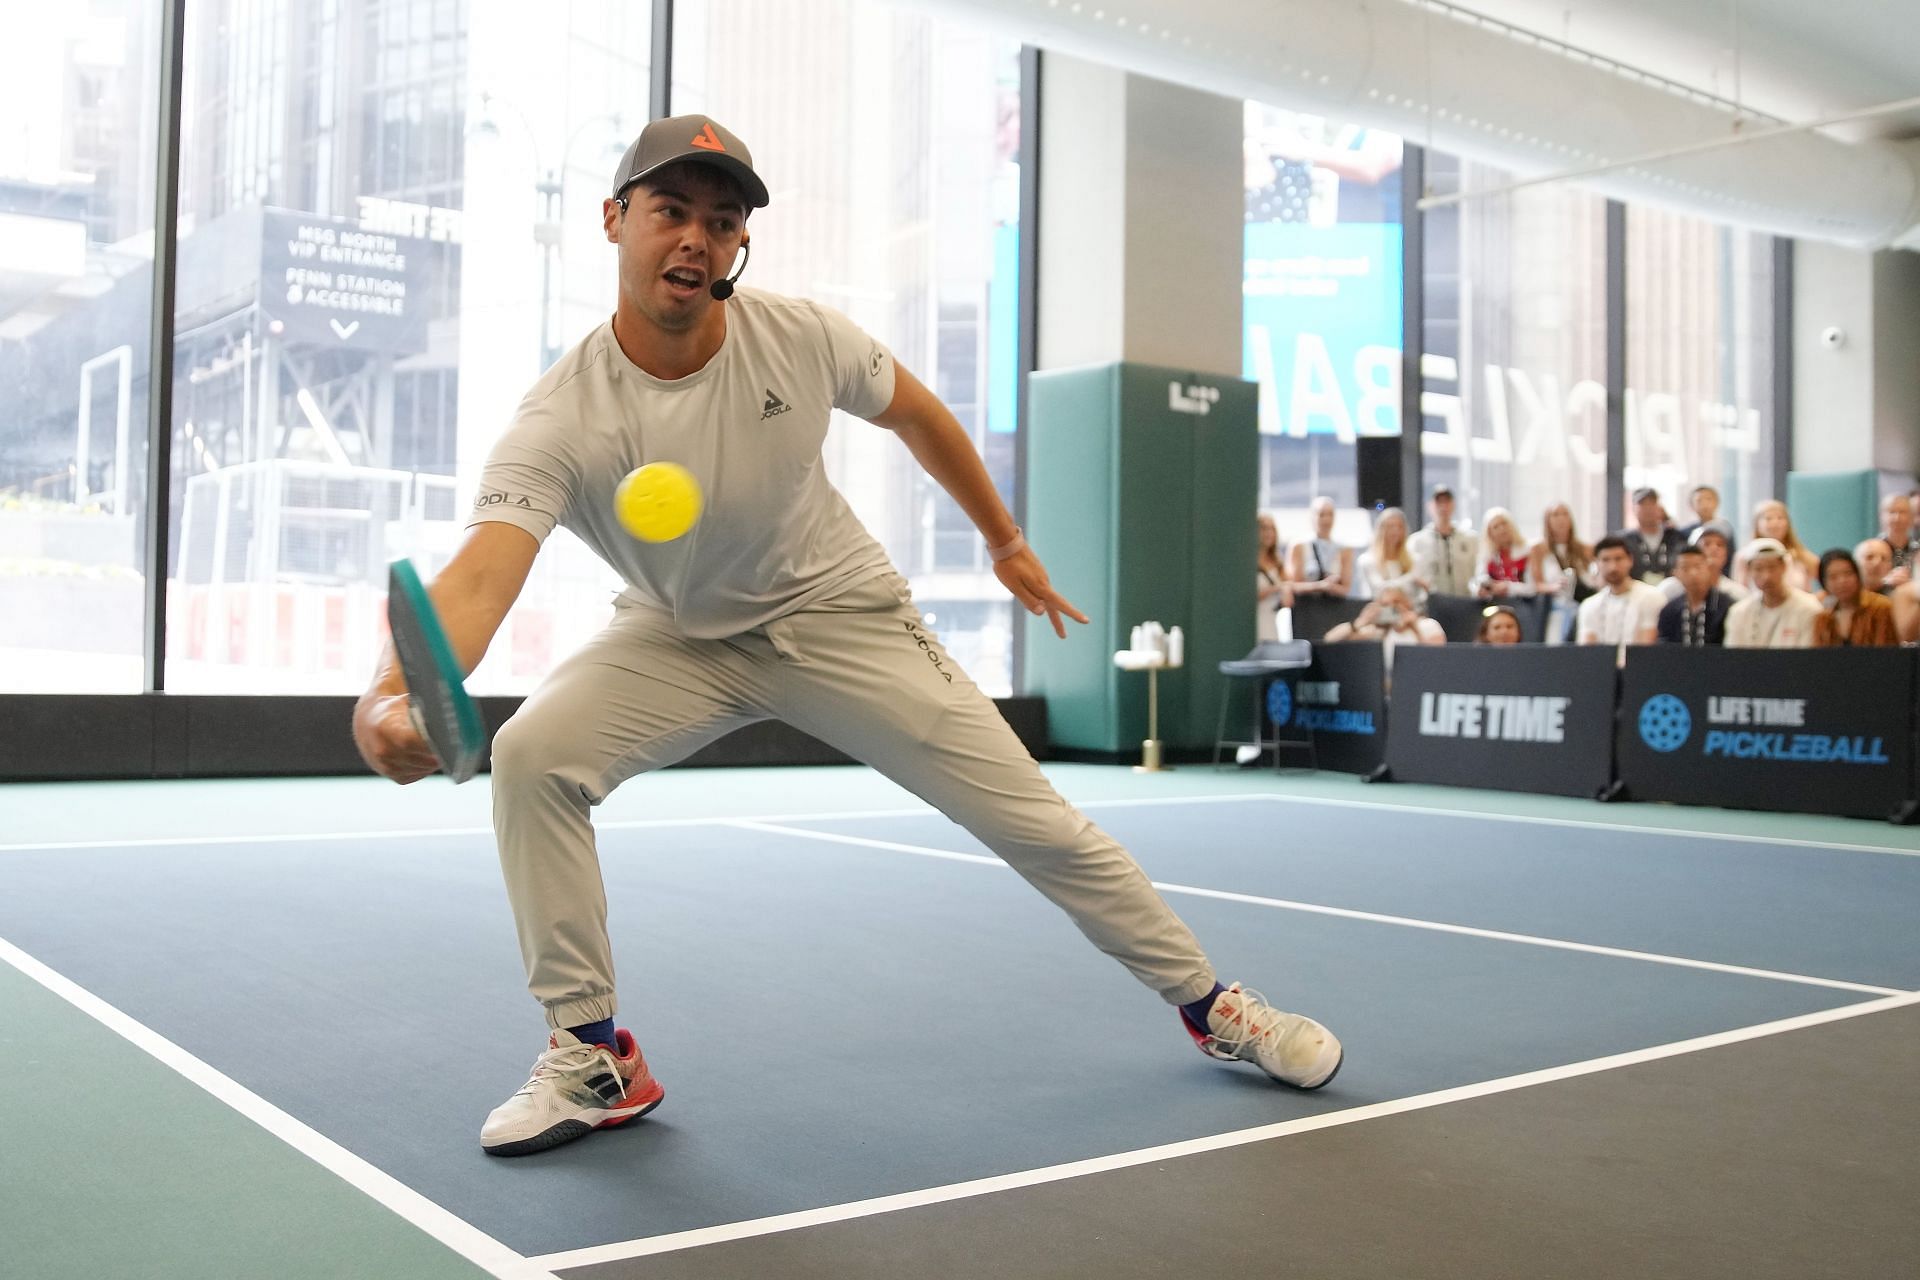 Andre Agassi Plays Pickleball With World